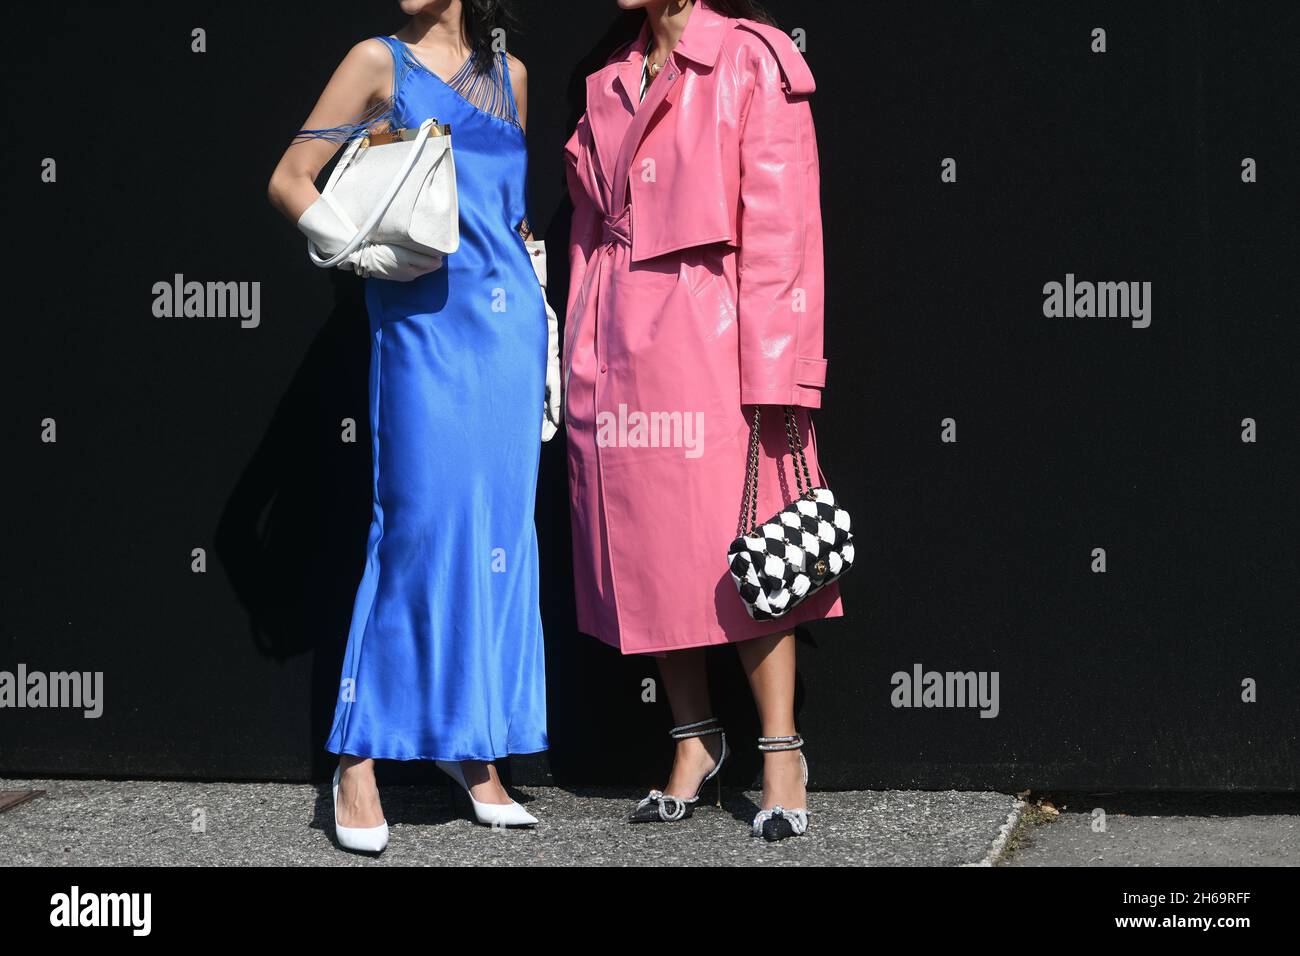 Milan, Italy - September 24, 2021: Street style outfit, two fashionable  women wearingpink oversized coat, checkered black white Chanel bag, heels  and Stock Photo - Alamy